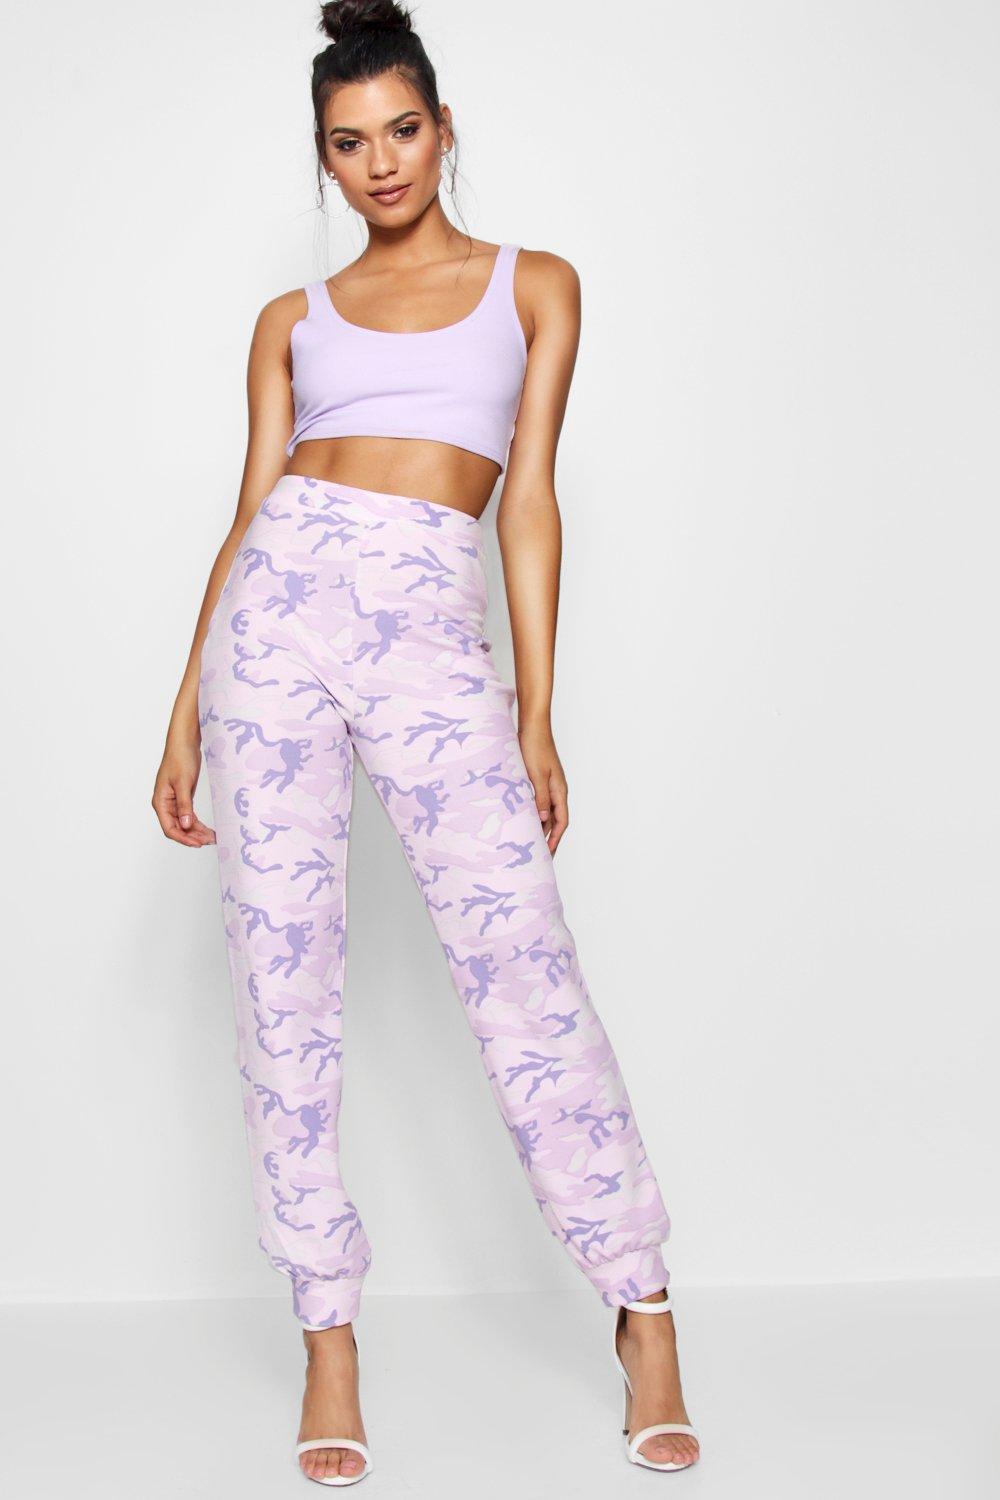 lilac camo trousers